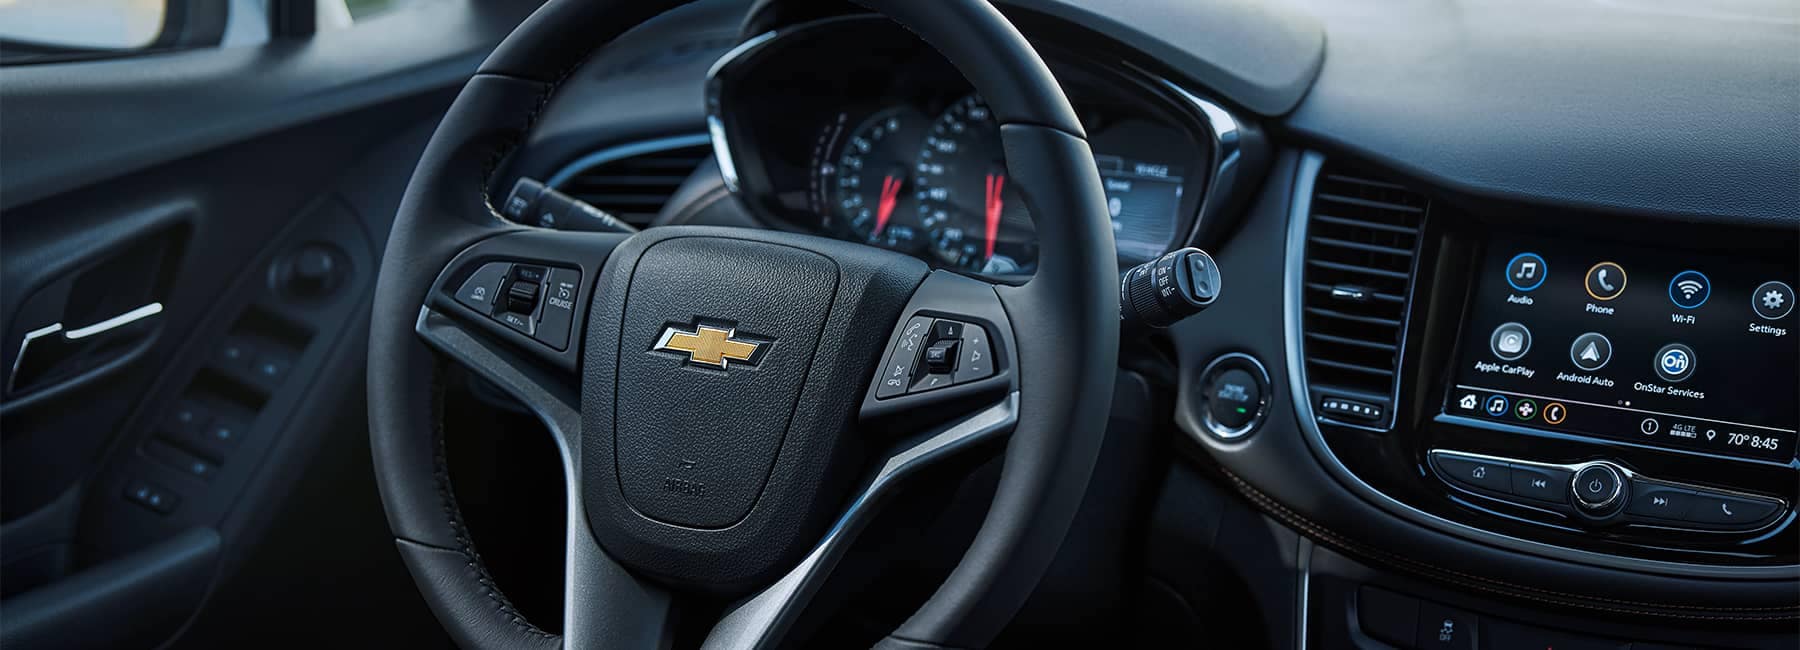 Interior dashboard of a 2021 Chevrolet Trax_mobile